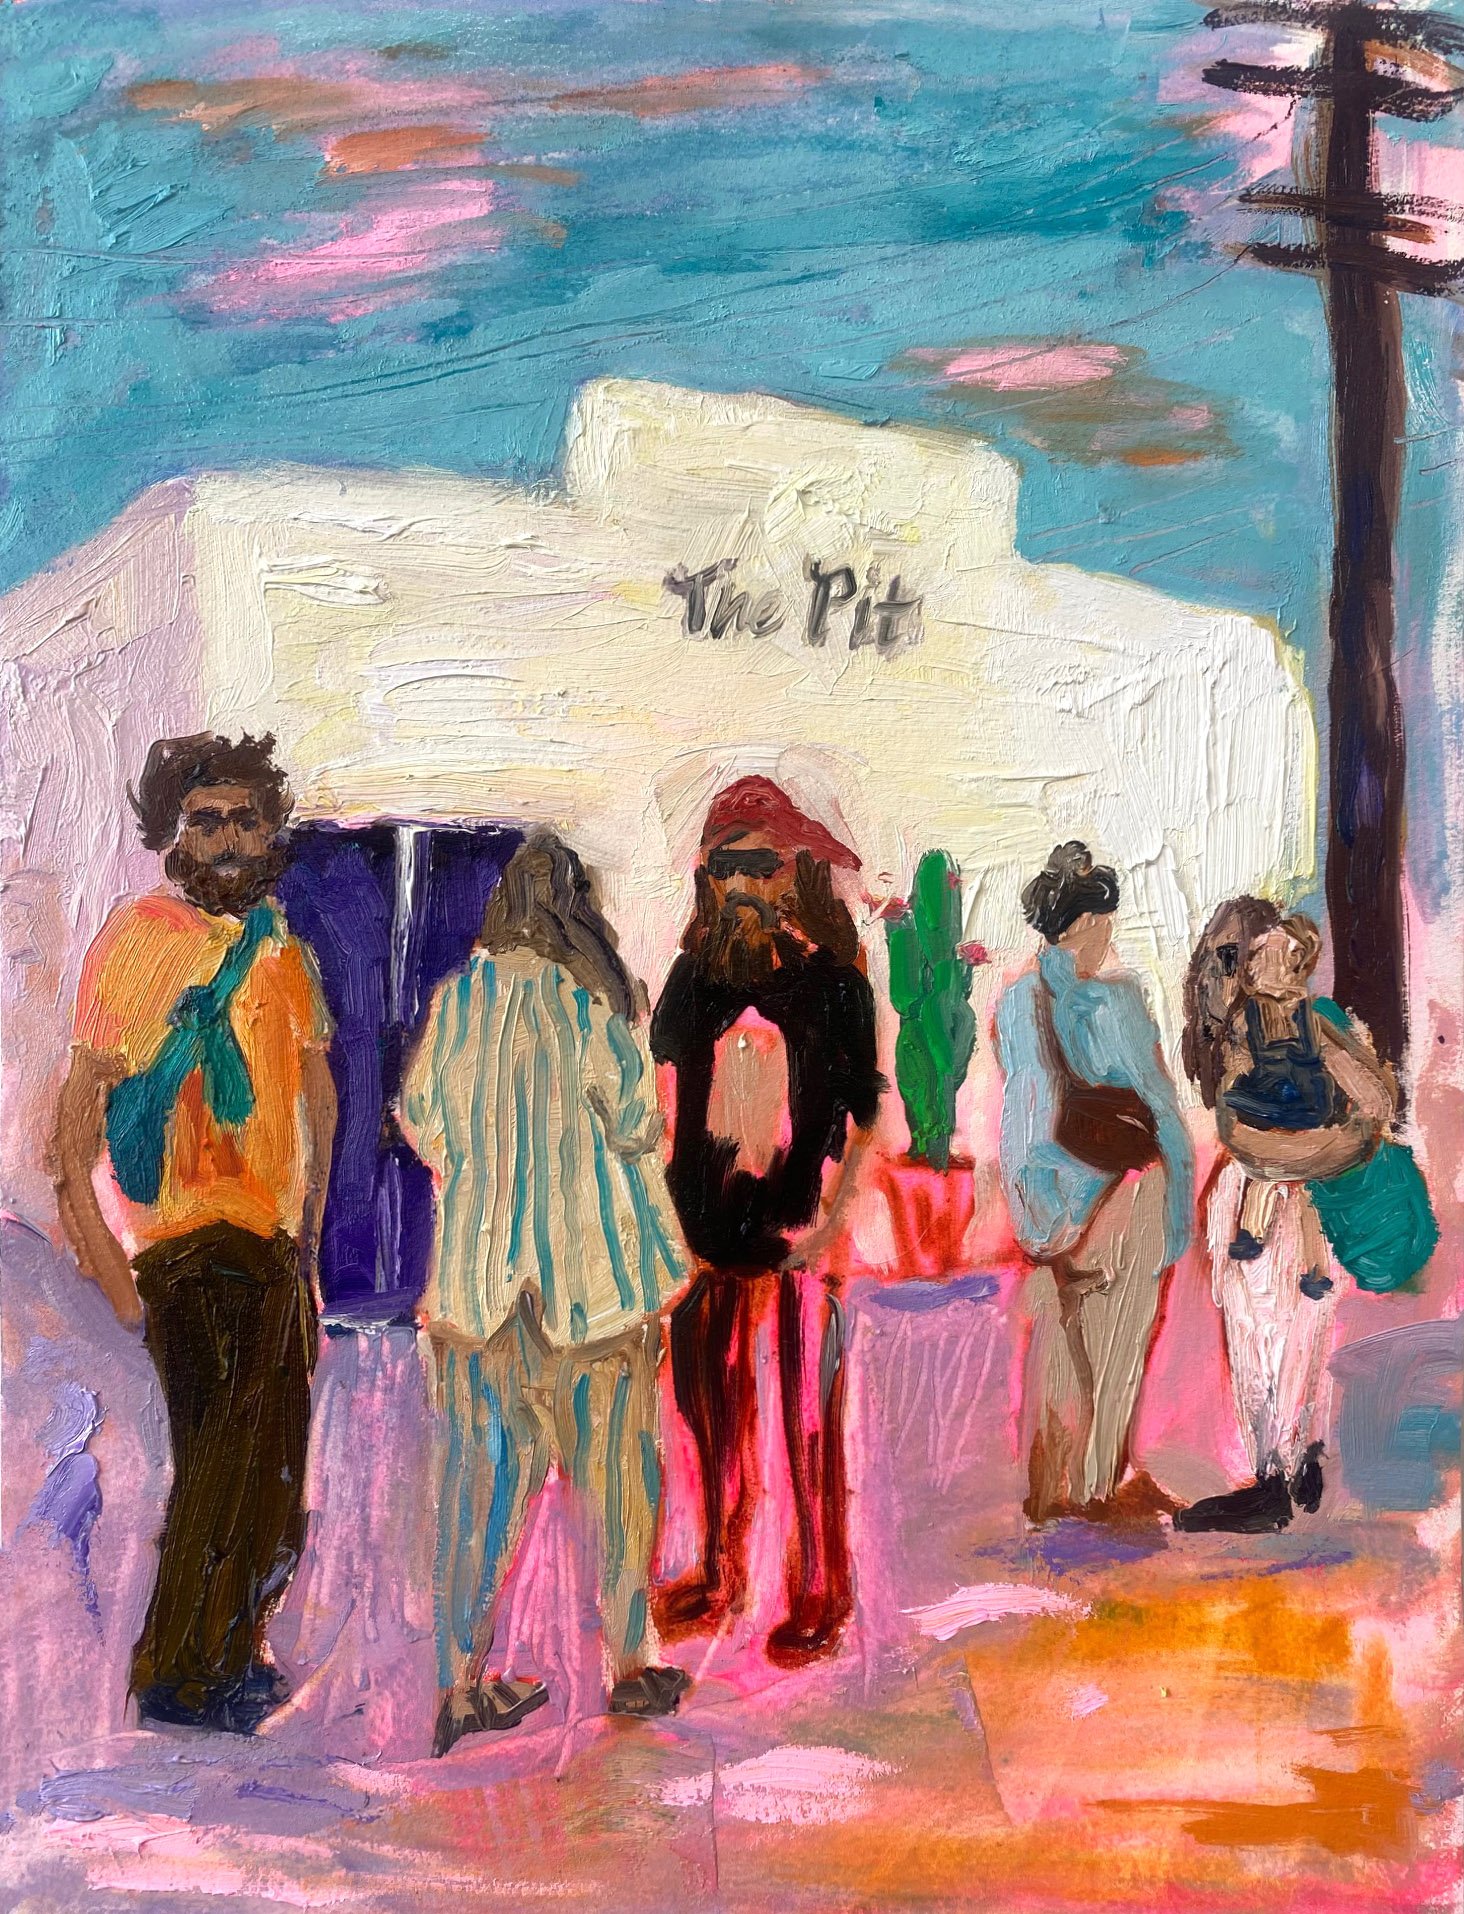 THE PIT - STUDY